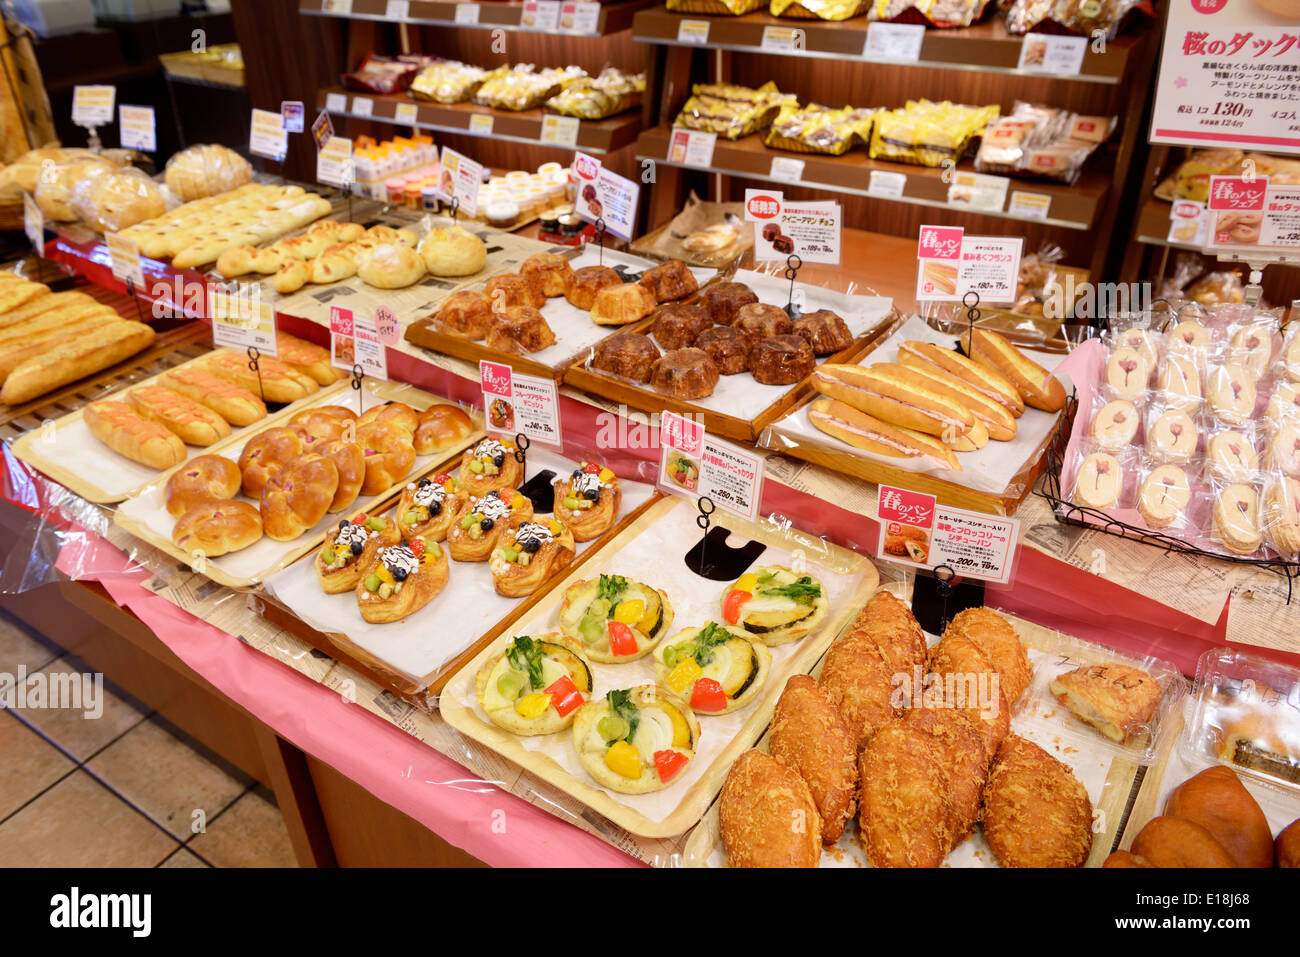 Pastries and snacks at Japanese bakery in Tokyo, Japan Stock Photo